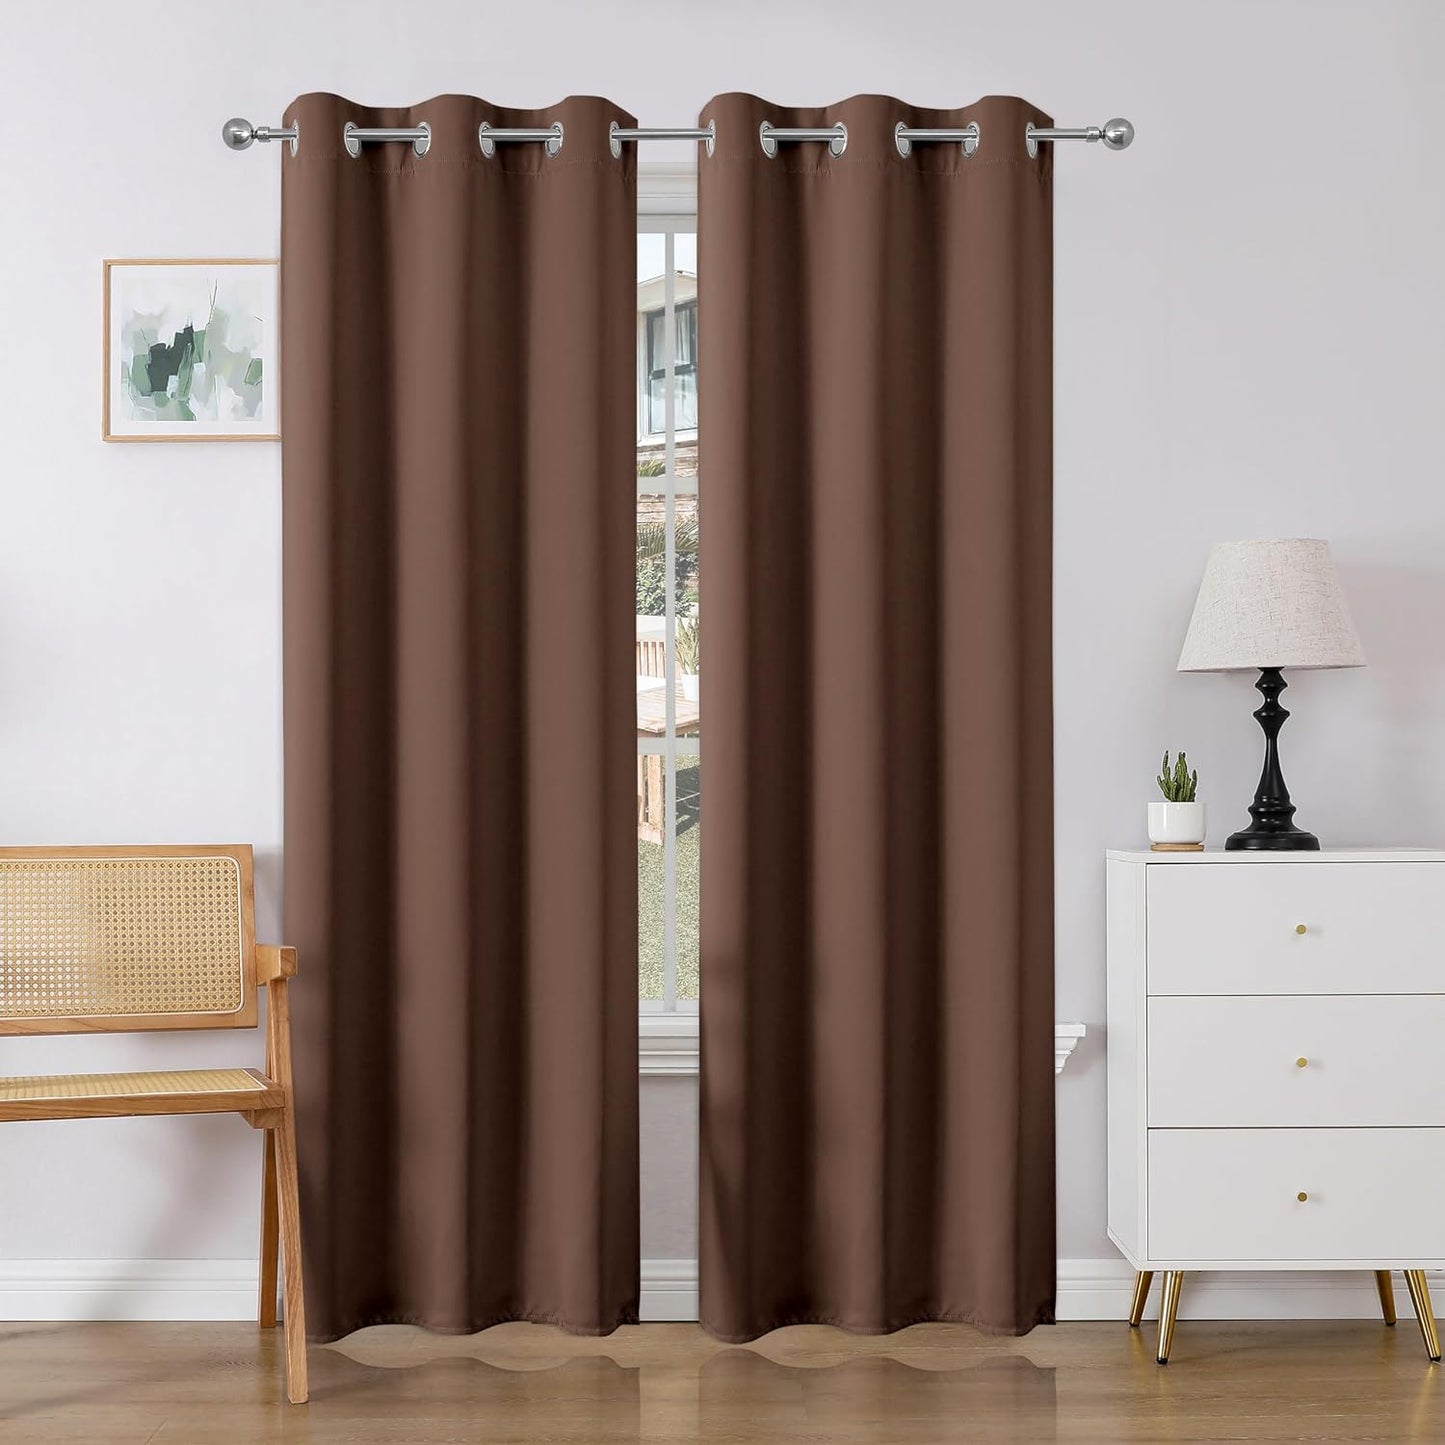 Joydeco Blackout Curtains 84 Inch Length 2 Panels Set, Thermal Insulated Long Curtains& Drapes 2 Burg, Room Darkening Grommet Curtains for Bedroom Living Room Window (Black, W52 X L84 Inch)  Joydeco Brown 40W X 78L Inch X 2 Panels 